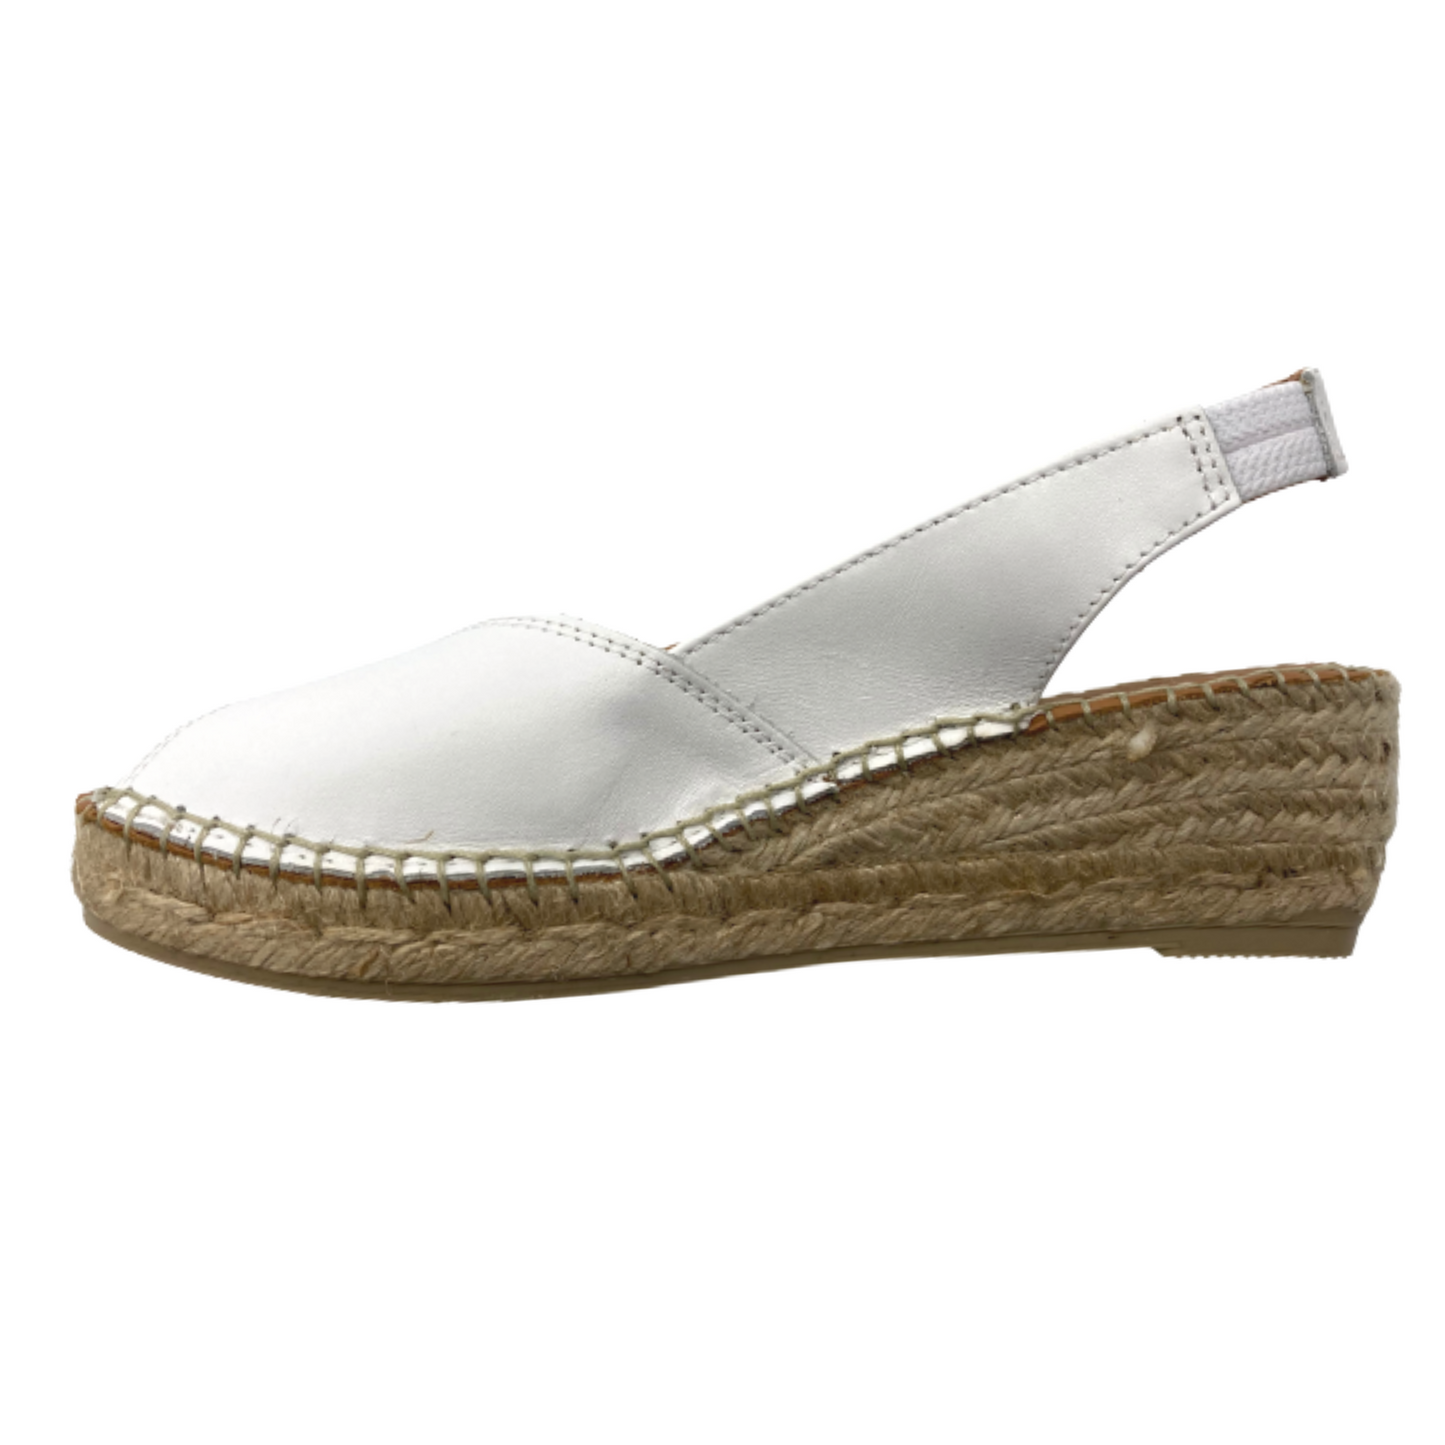 Inside view of a white espadrille sandal.  Peep toe front and open heel.  Slip on style but does have a back strap with an elastic for best fit.  Sole is a braided rope